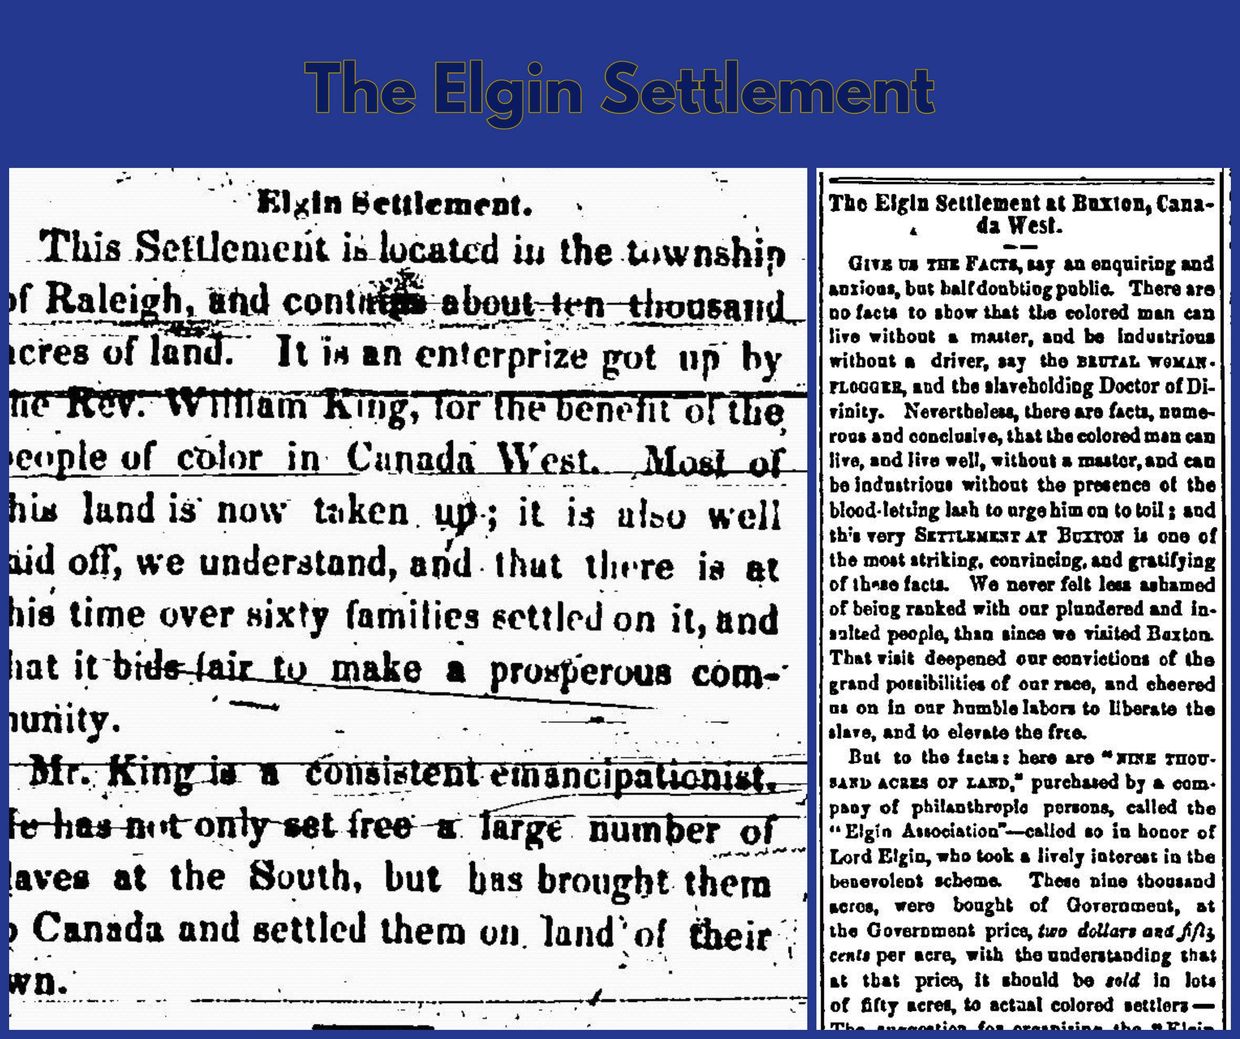 Articles from the Voice of the Fugitive, 2 Dec 1851 and Frederick Douglass's Paper, 25 Aug 1854